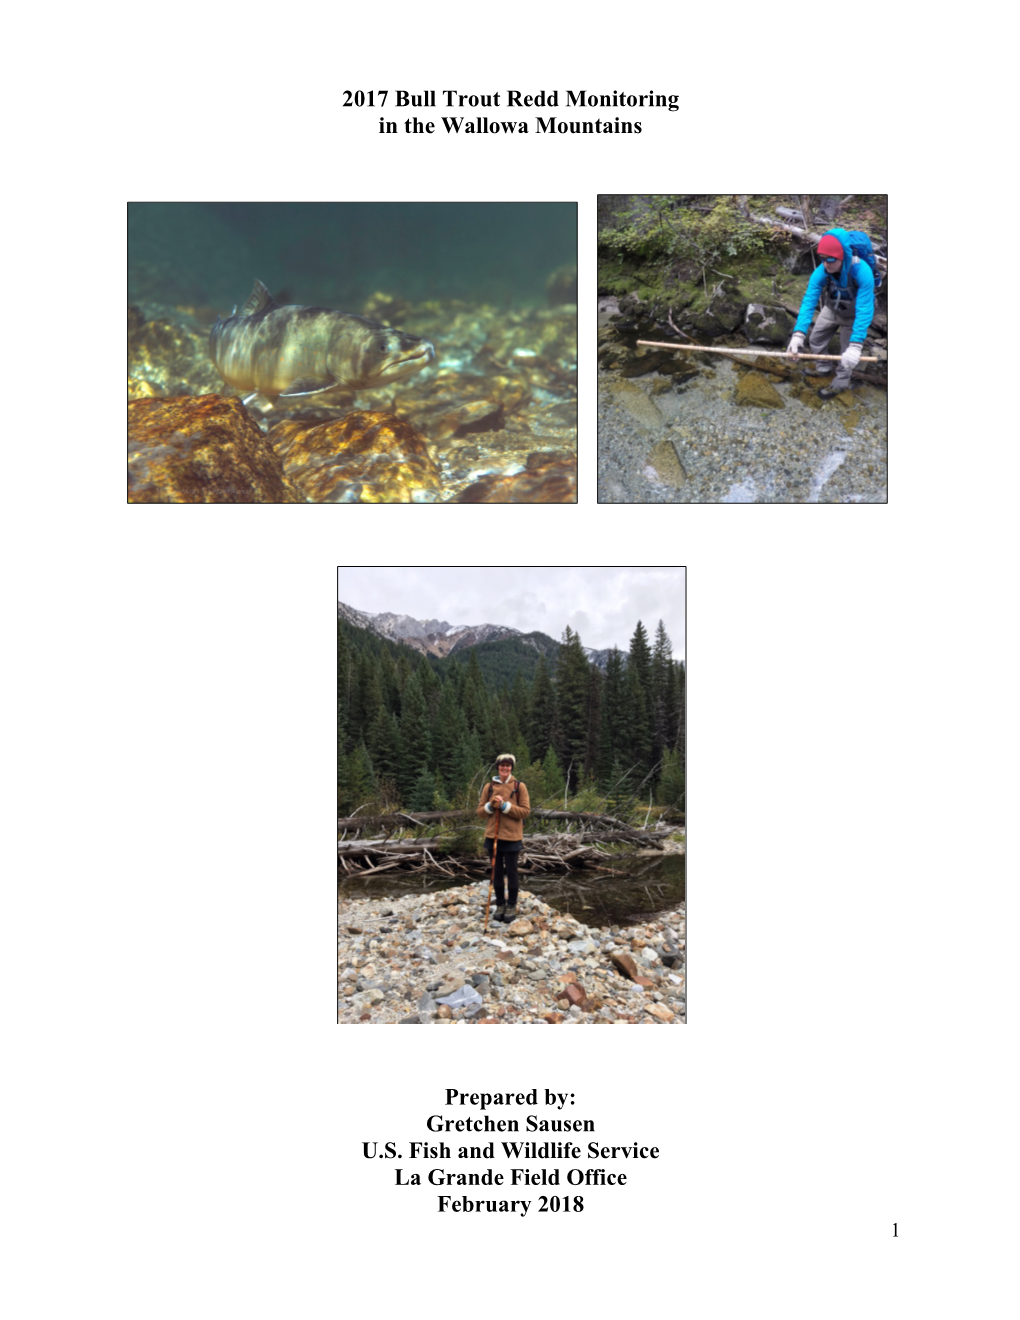 2017 Bull Trout Redd Monitoring in the Wallowa Mountains Prepared By